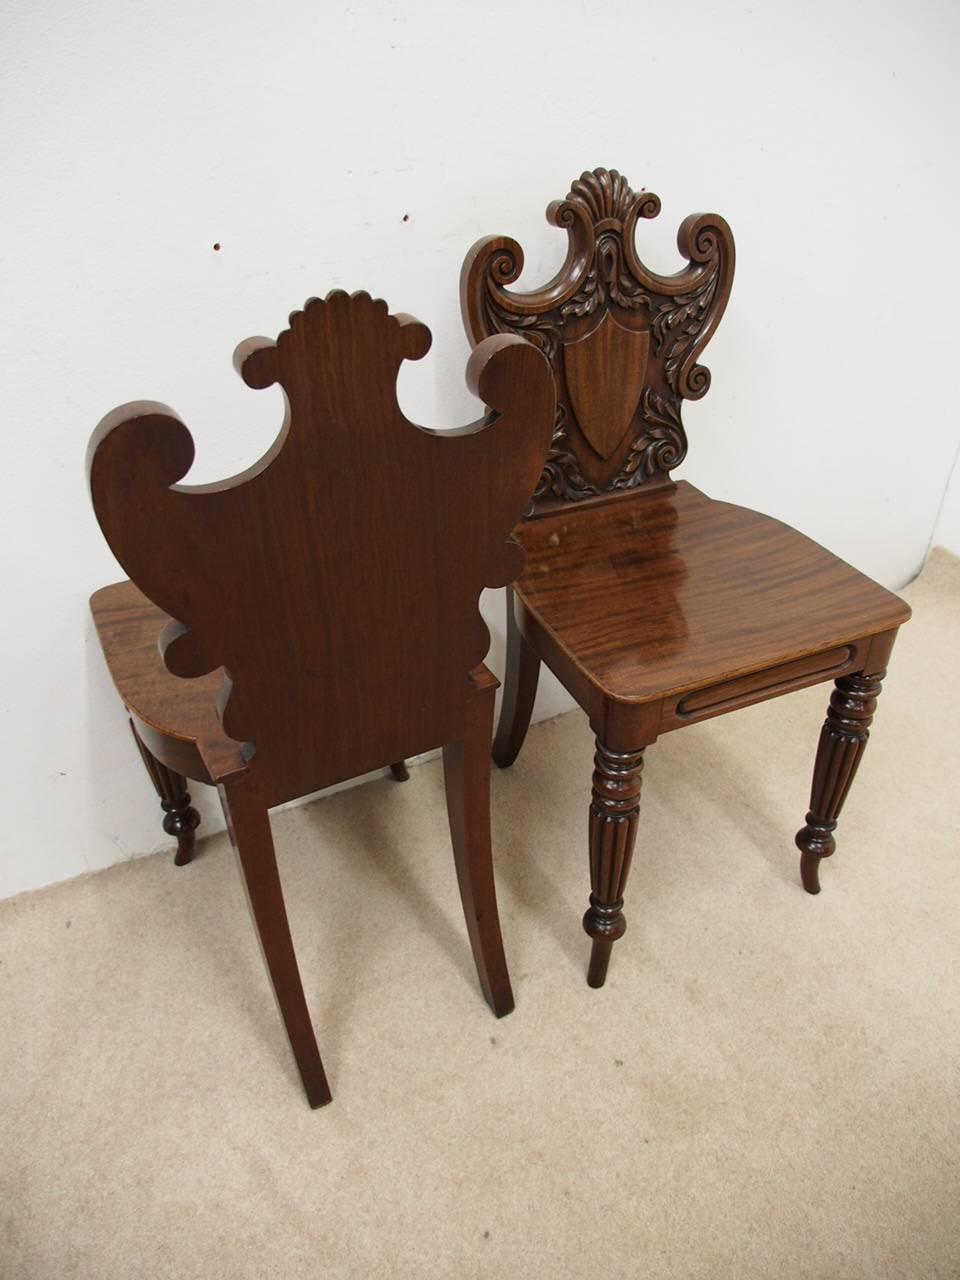 Exceptional pair of George III mahogany hall chairs, circa 1800. The elaborately carved shield-shaped backs are surmounted by a crest and with C-scroll carvings to the sides; a carved shield is centrally placed and surrounded by laurel leaves. The